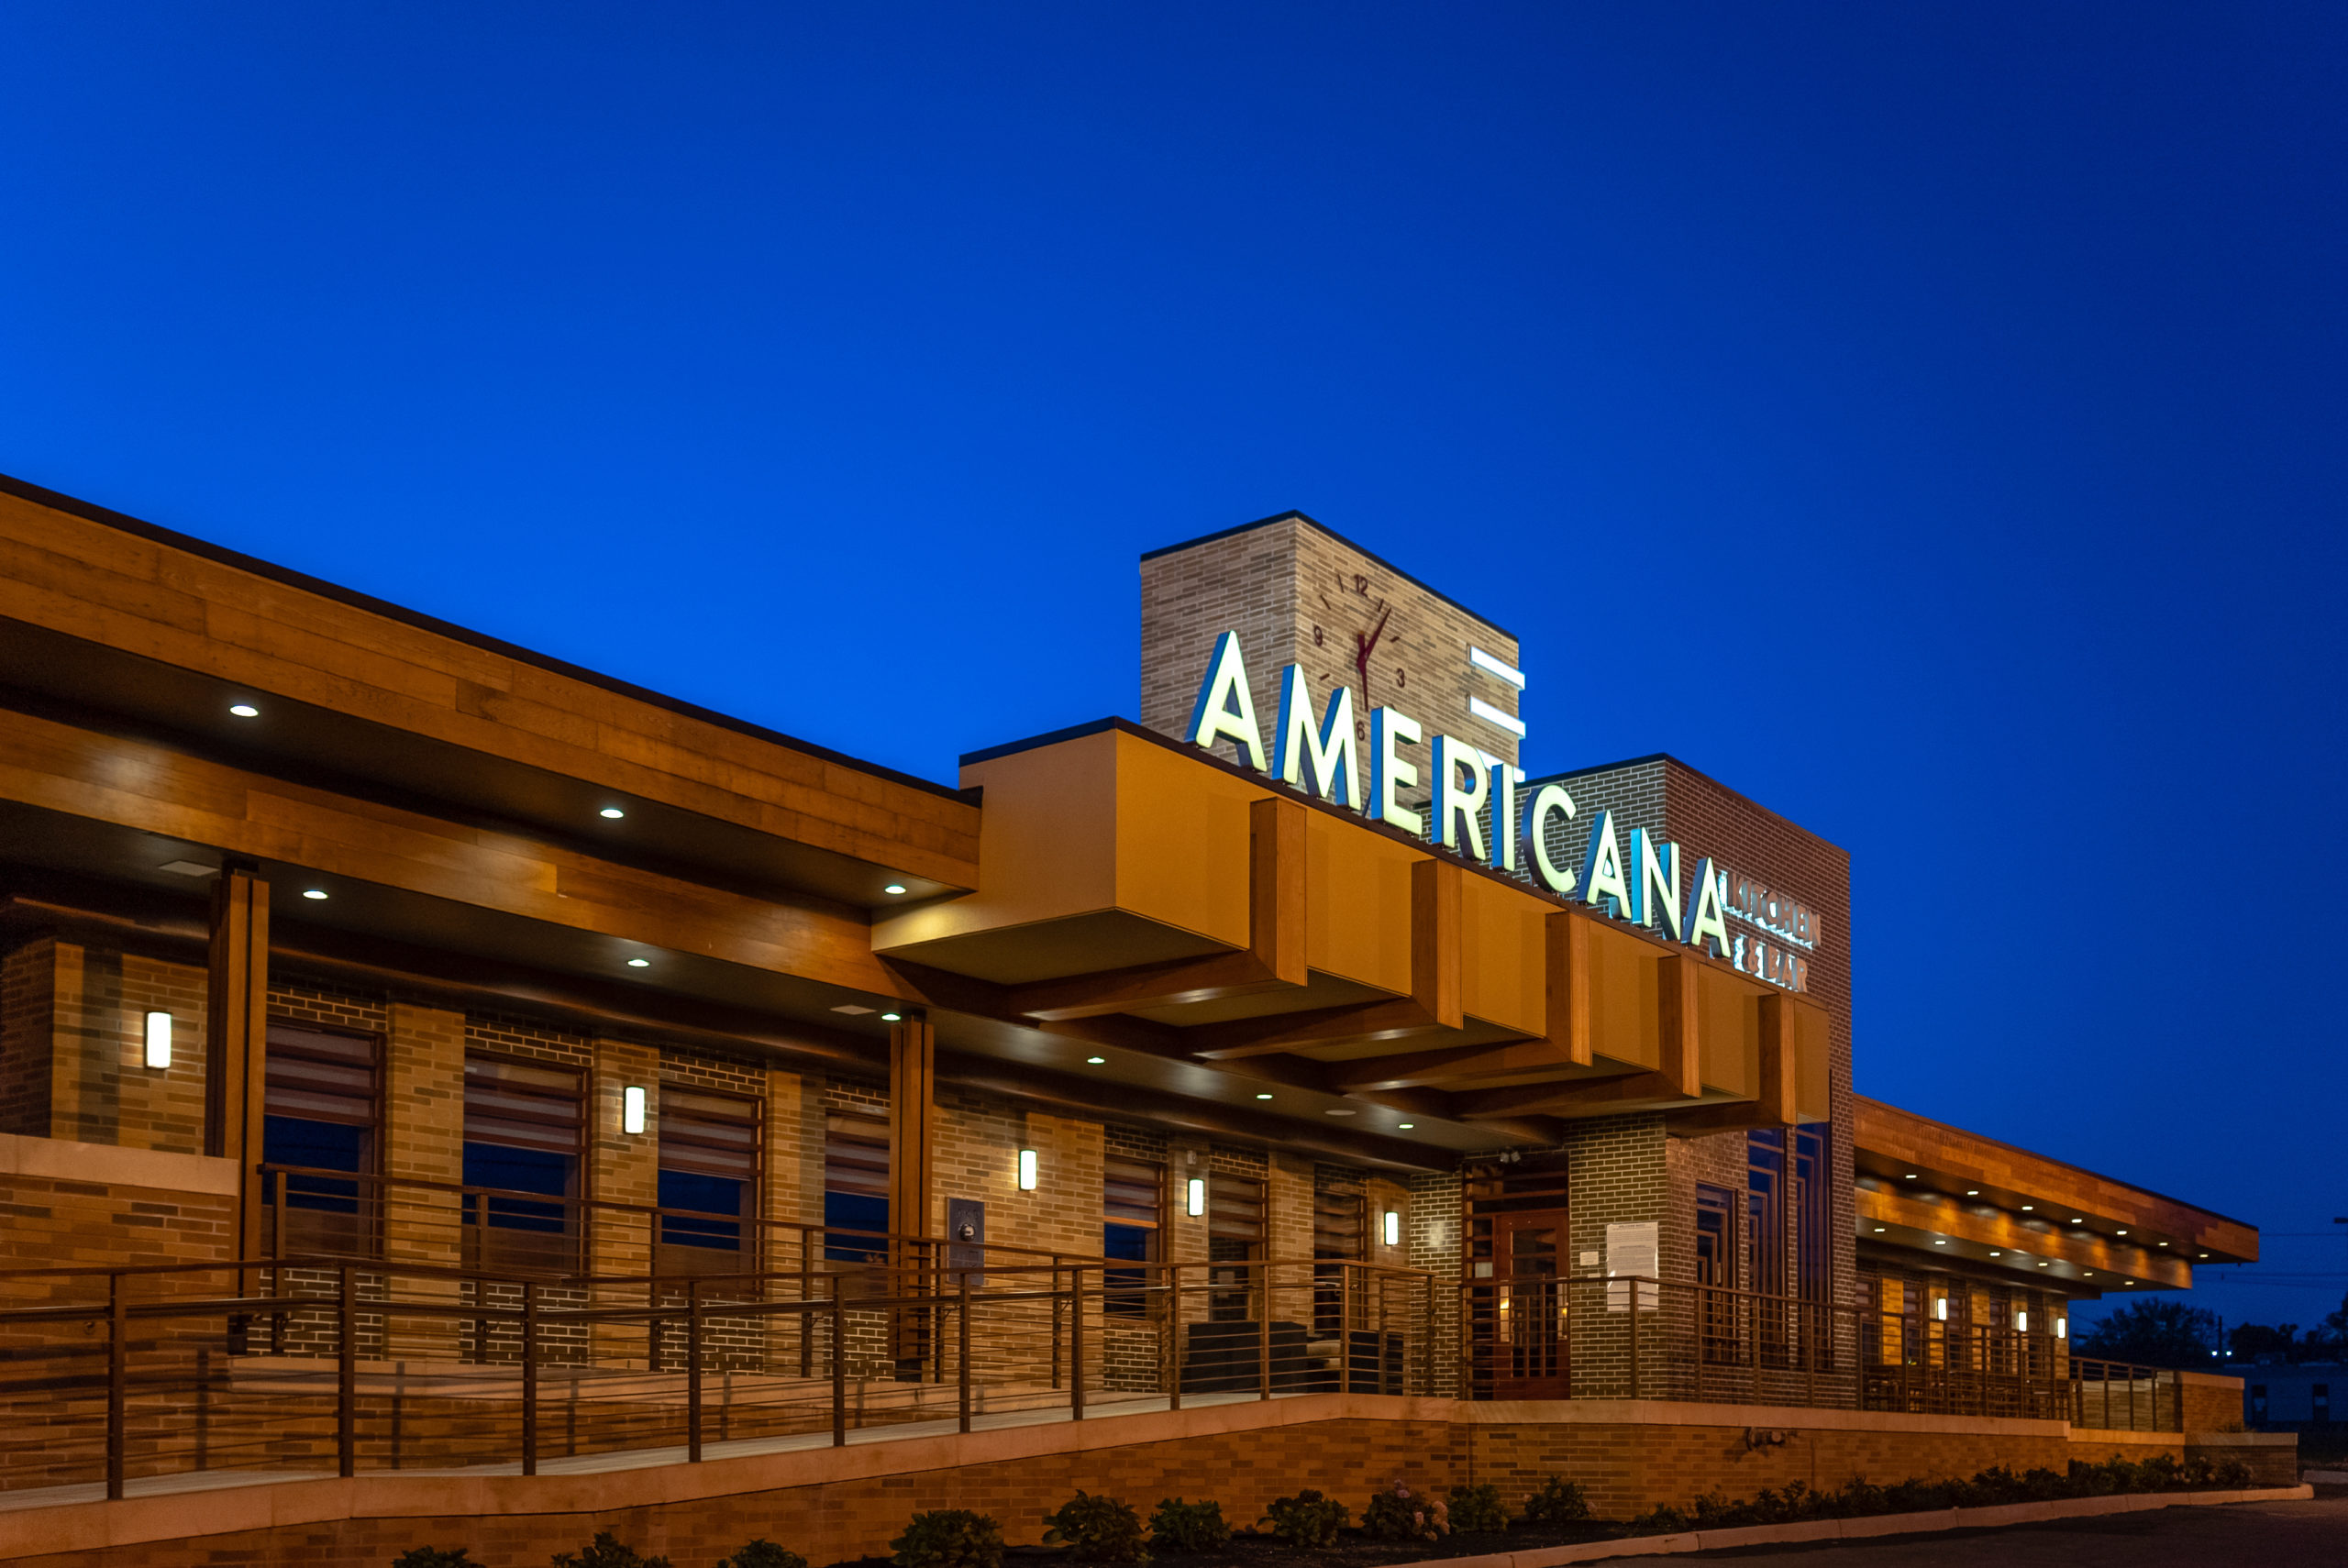 Americana Kitchen & Bar | Restaurant and Event Space in Central NJ